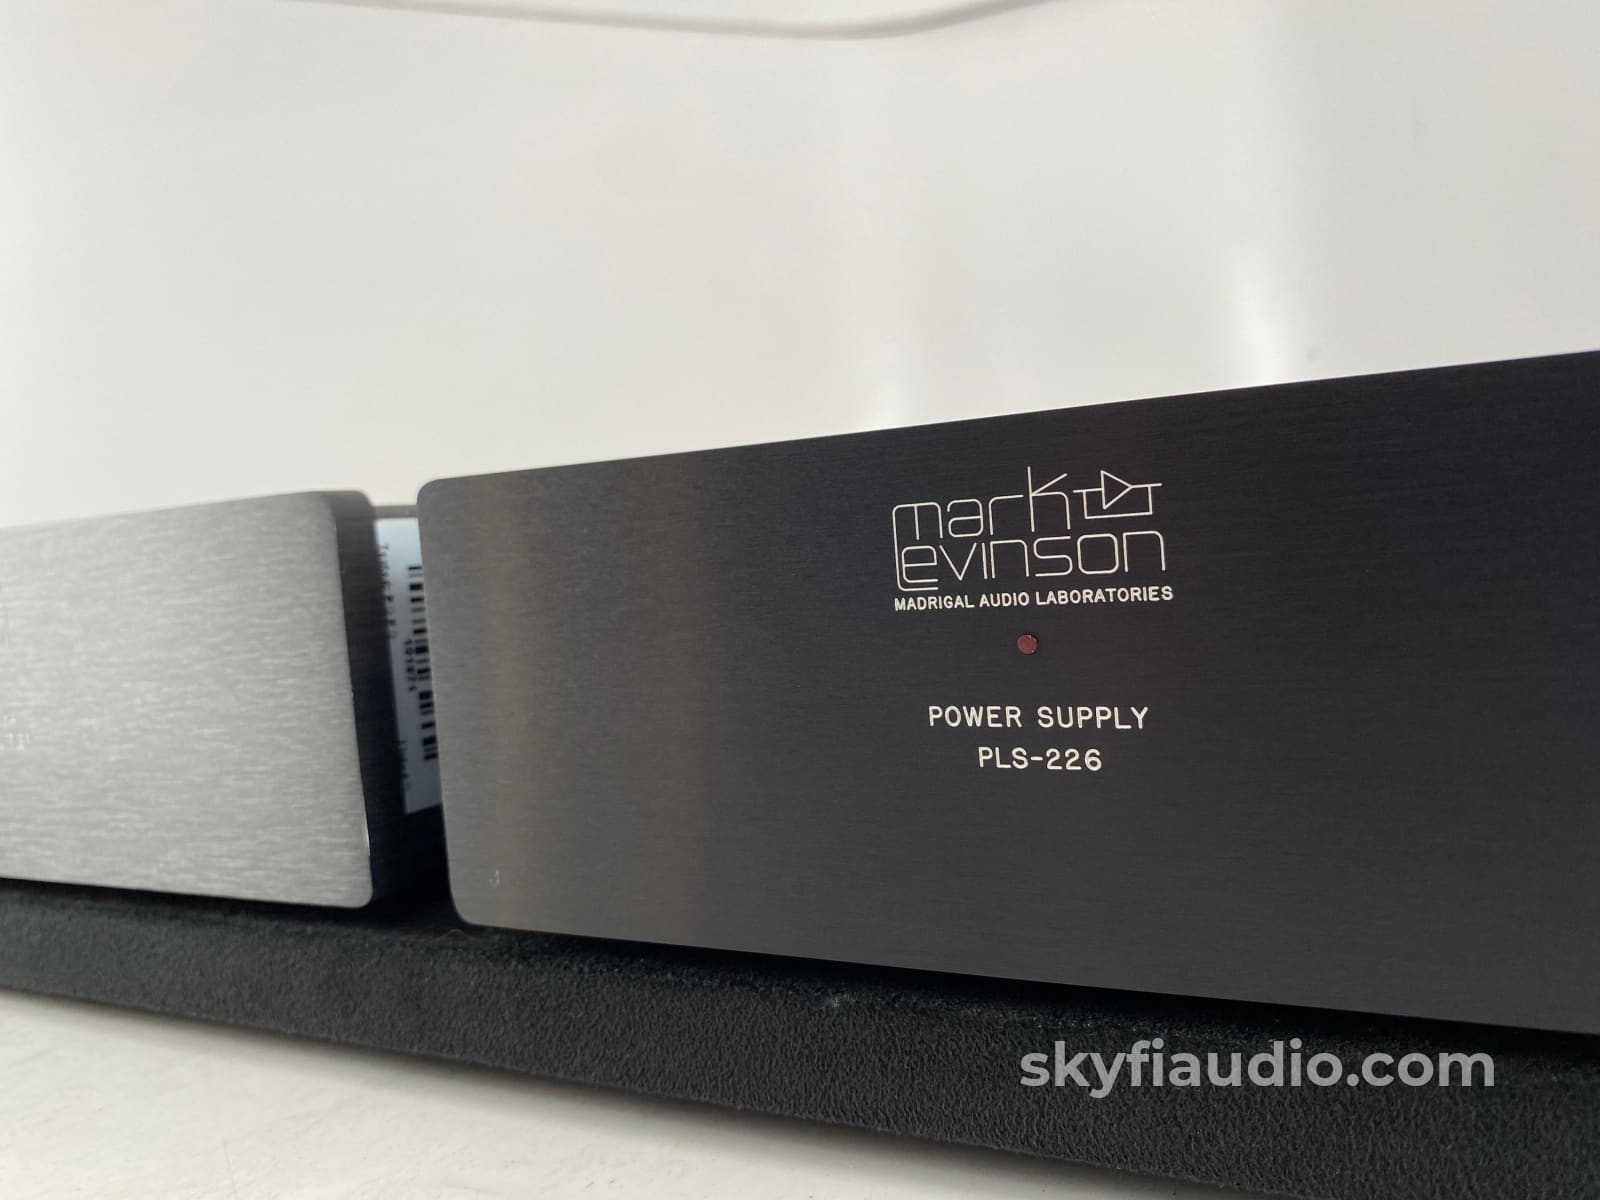 Mark Levinson No.25 Mc Phono Preamp With Power Supply (Pls-226) - Stereophile Class A Rated